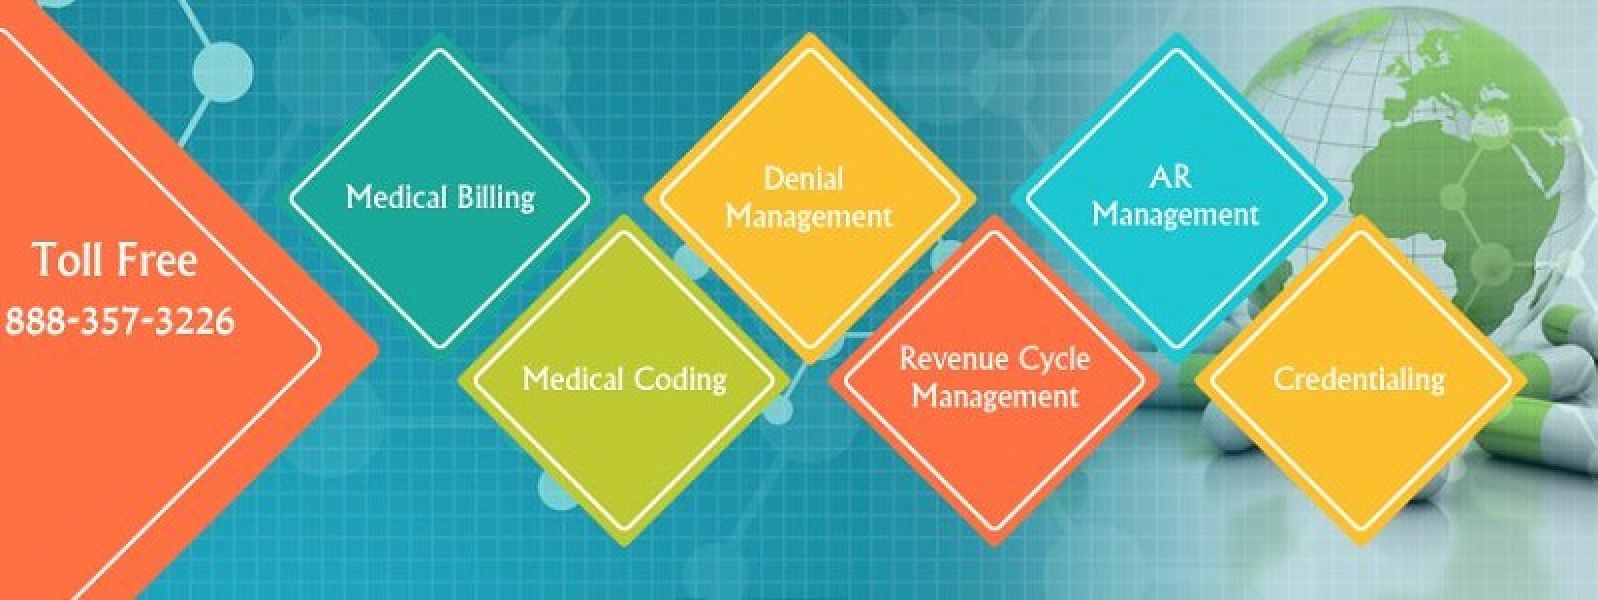 Medical billing services in Abbotsford, Wisconsin